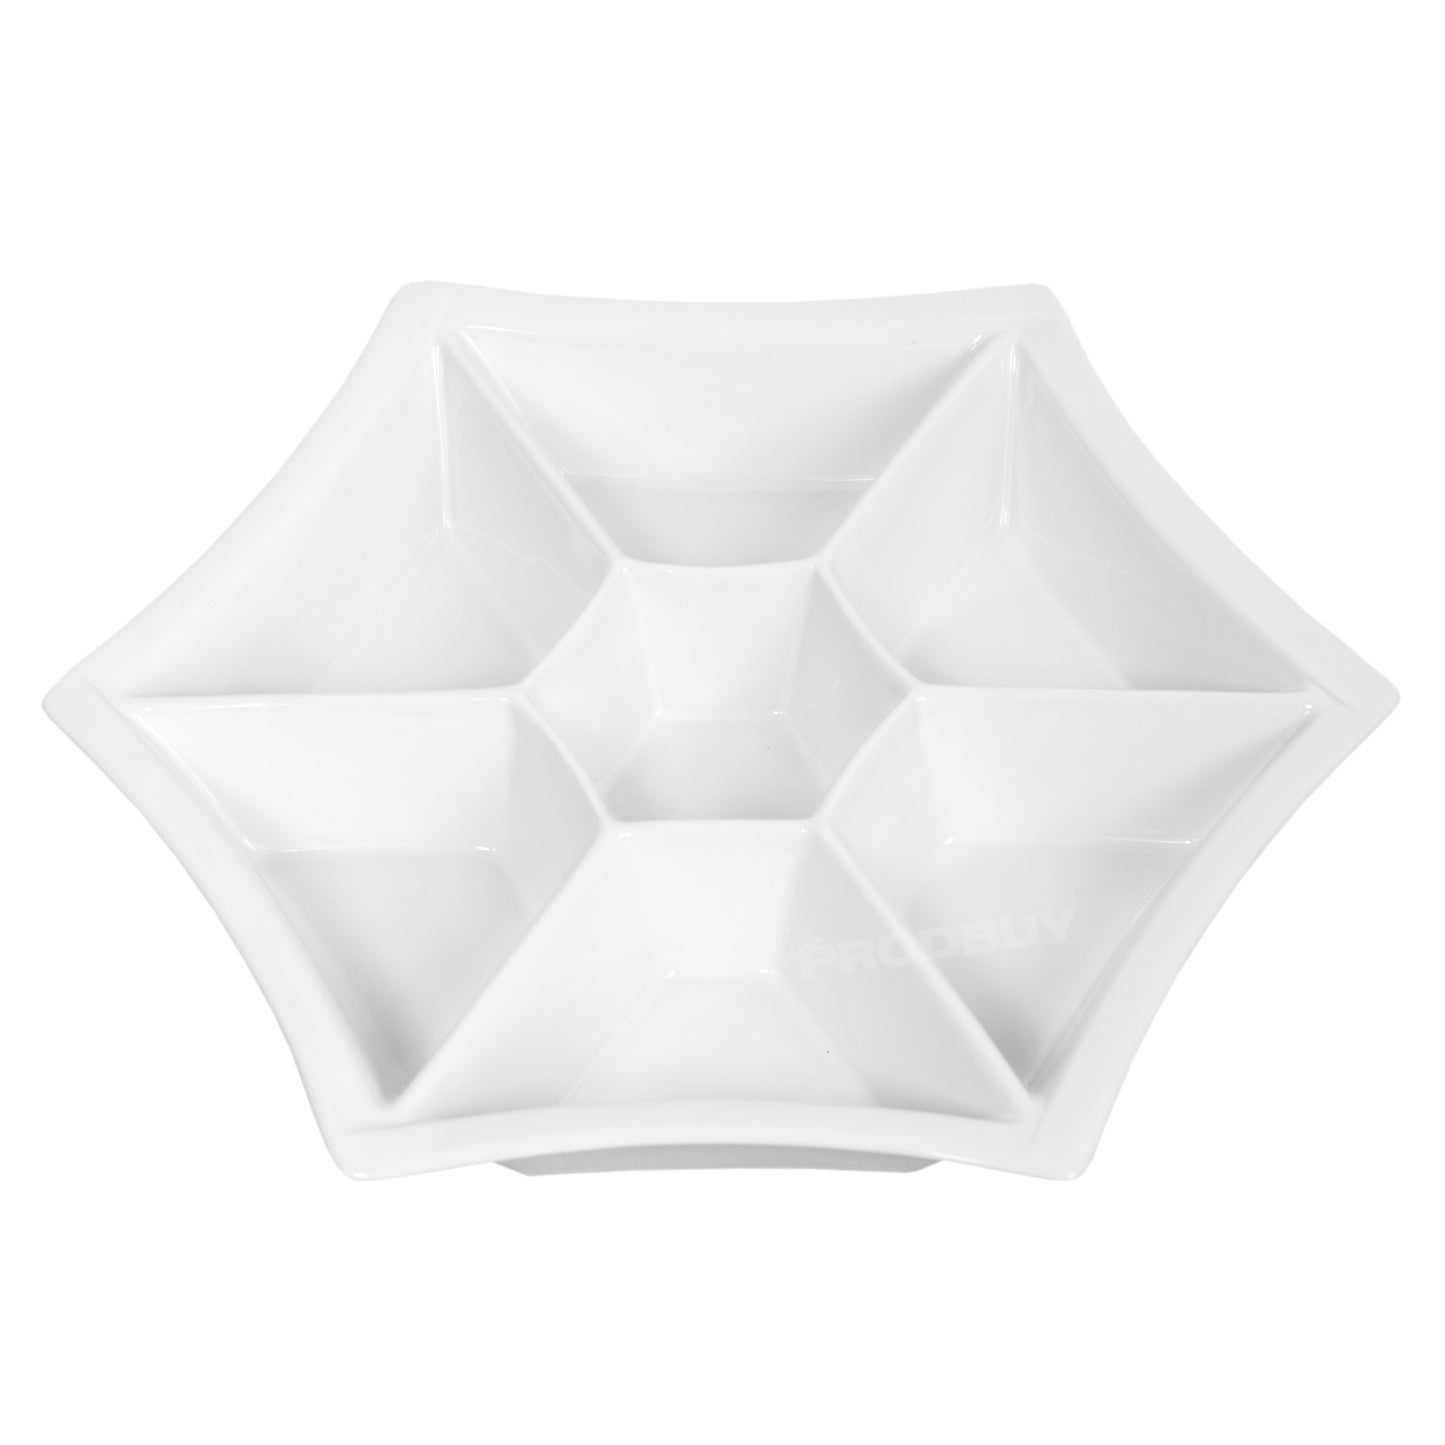 7 Compartment Hexagon Shaped Snack Serving Plate Dish Dip Bowl Tray Tapas Appetiser